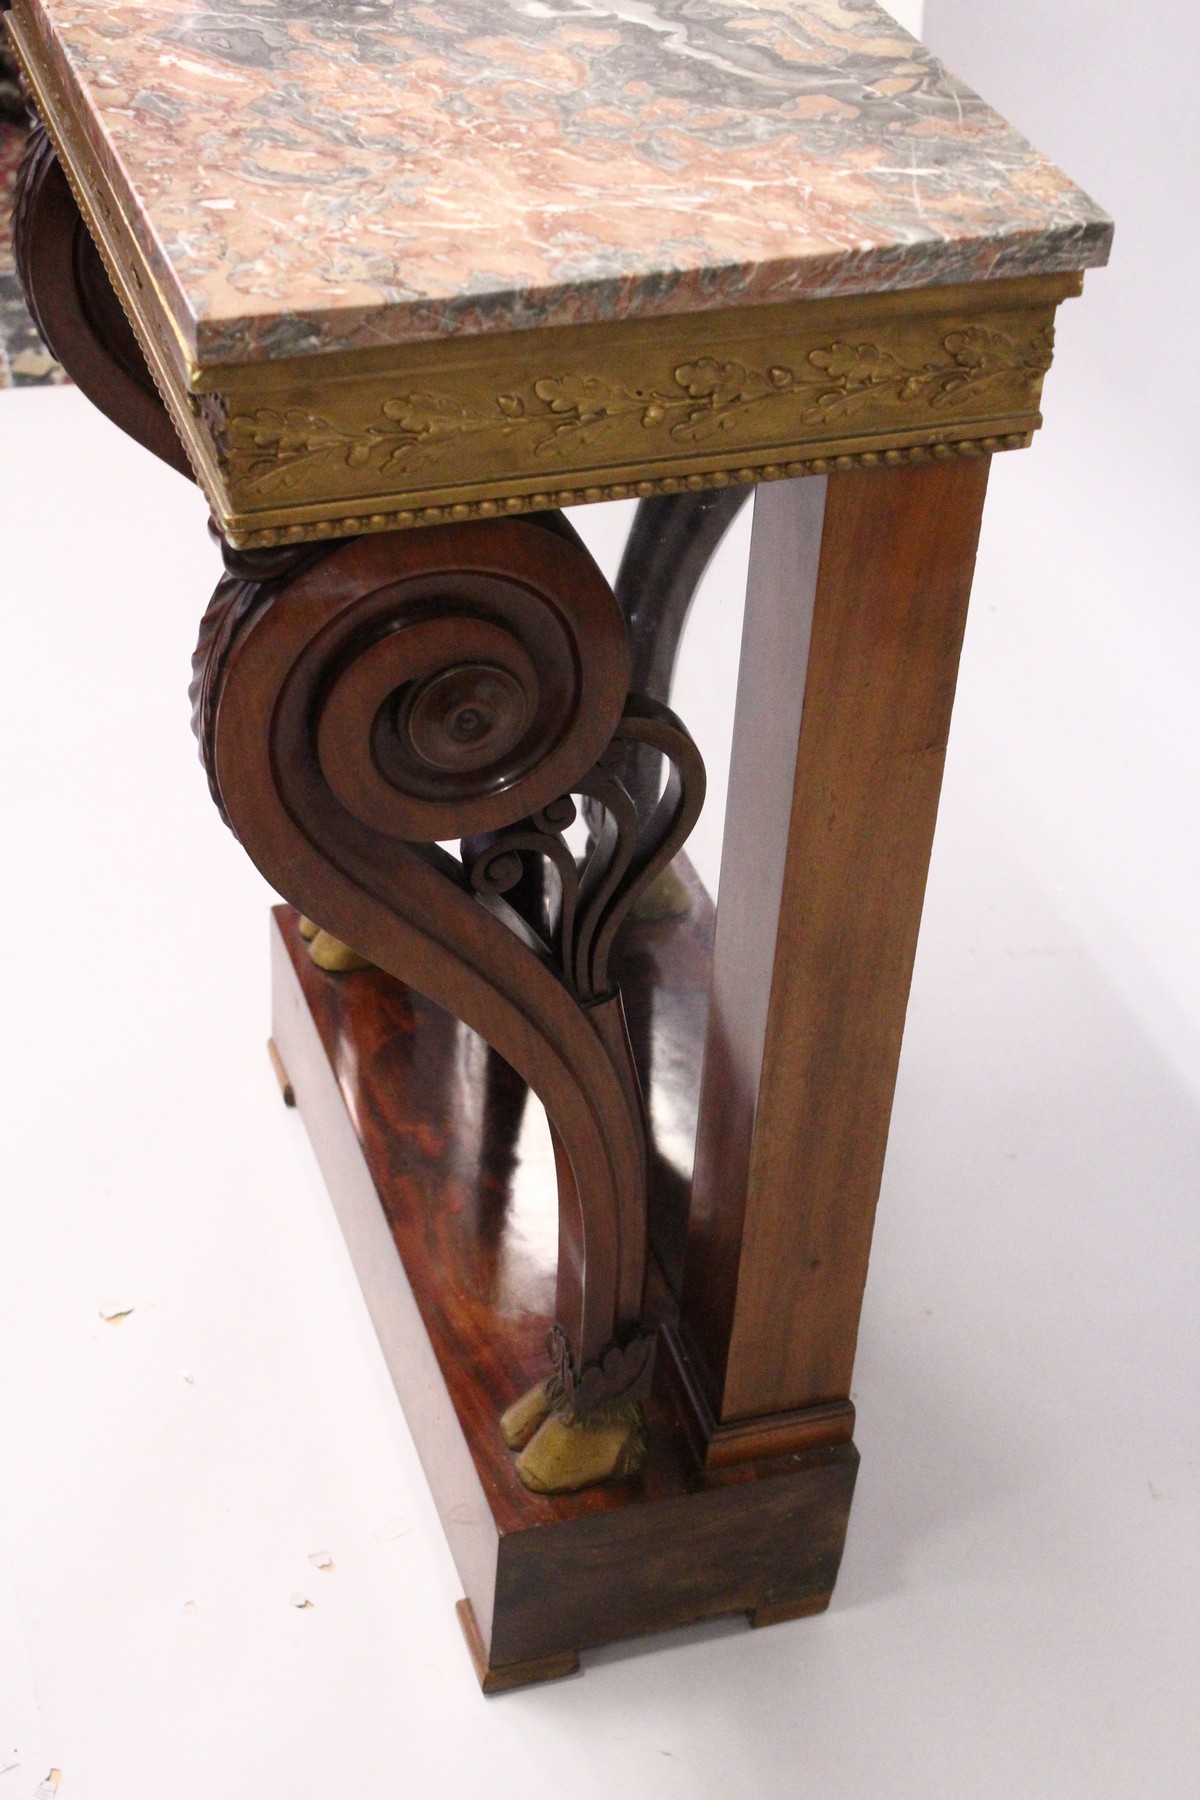 A REGENCY MAHOGANY SMALL PIER/CONSOLE TABLE, with a marble top over an ornate gilded frieze, on a - Image 4 of 6